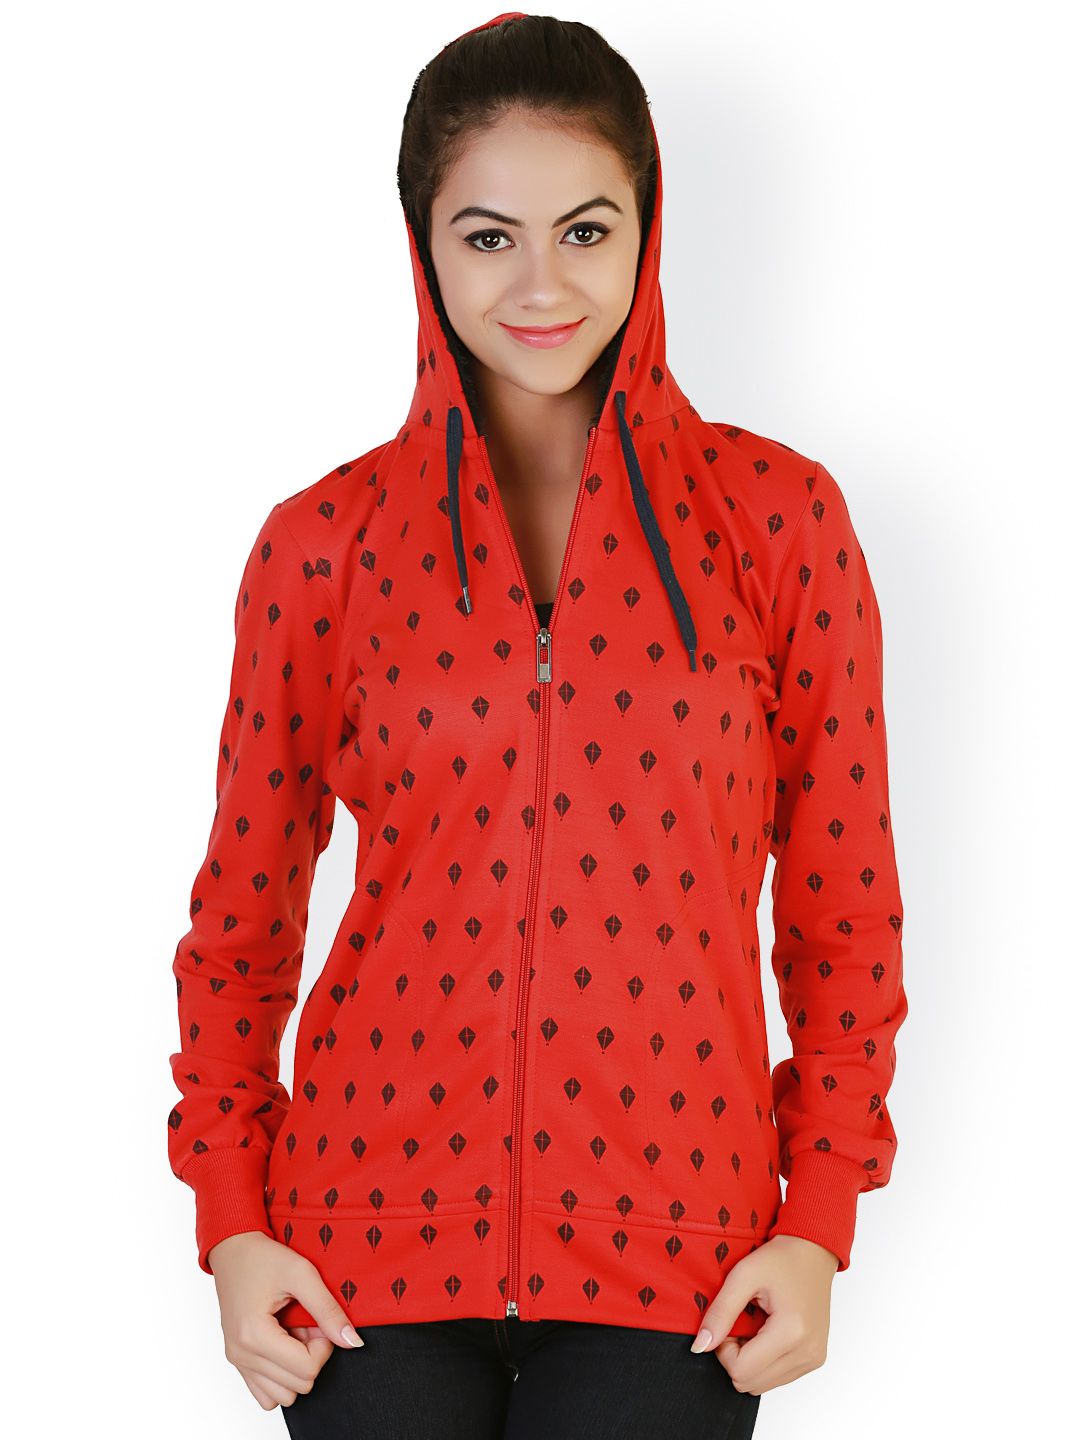 Belle Fille Red Printed Jacket Price in India